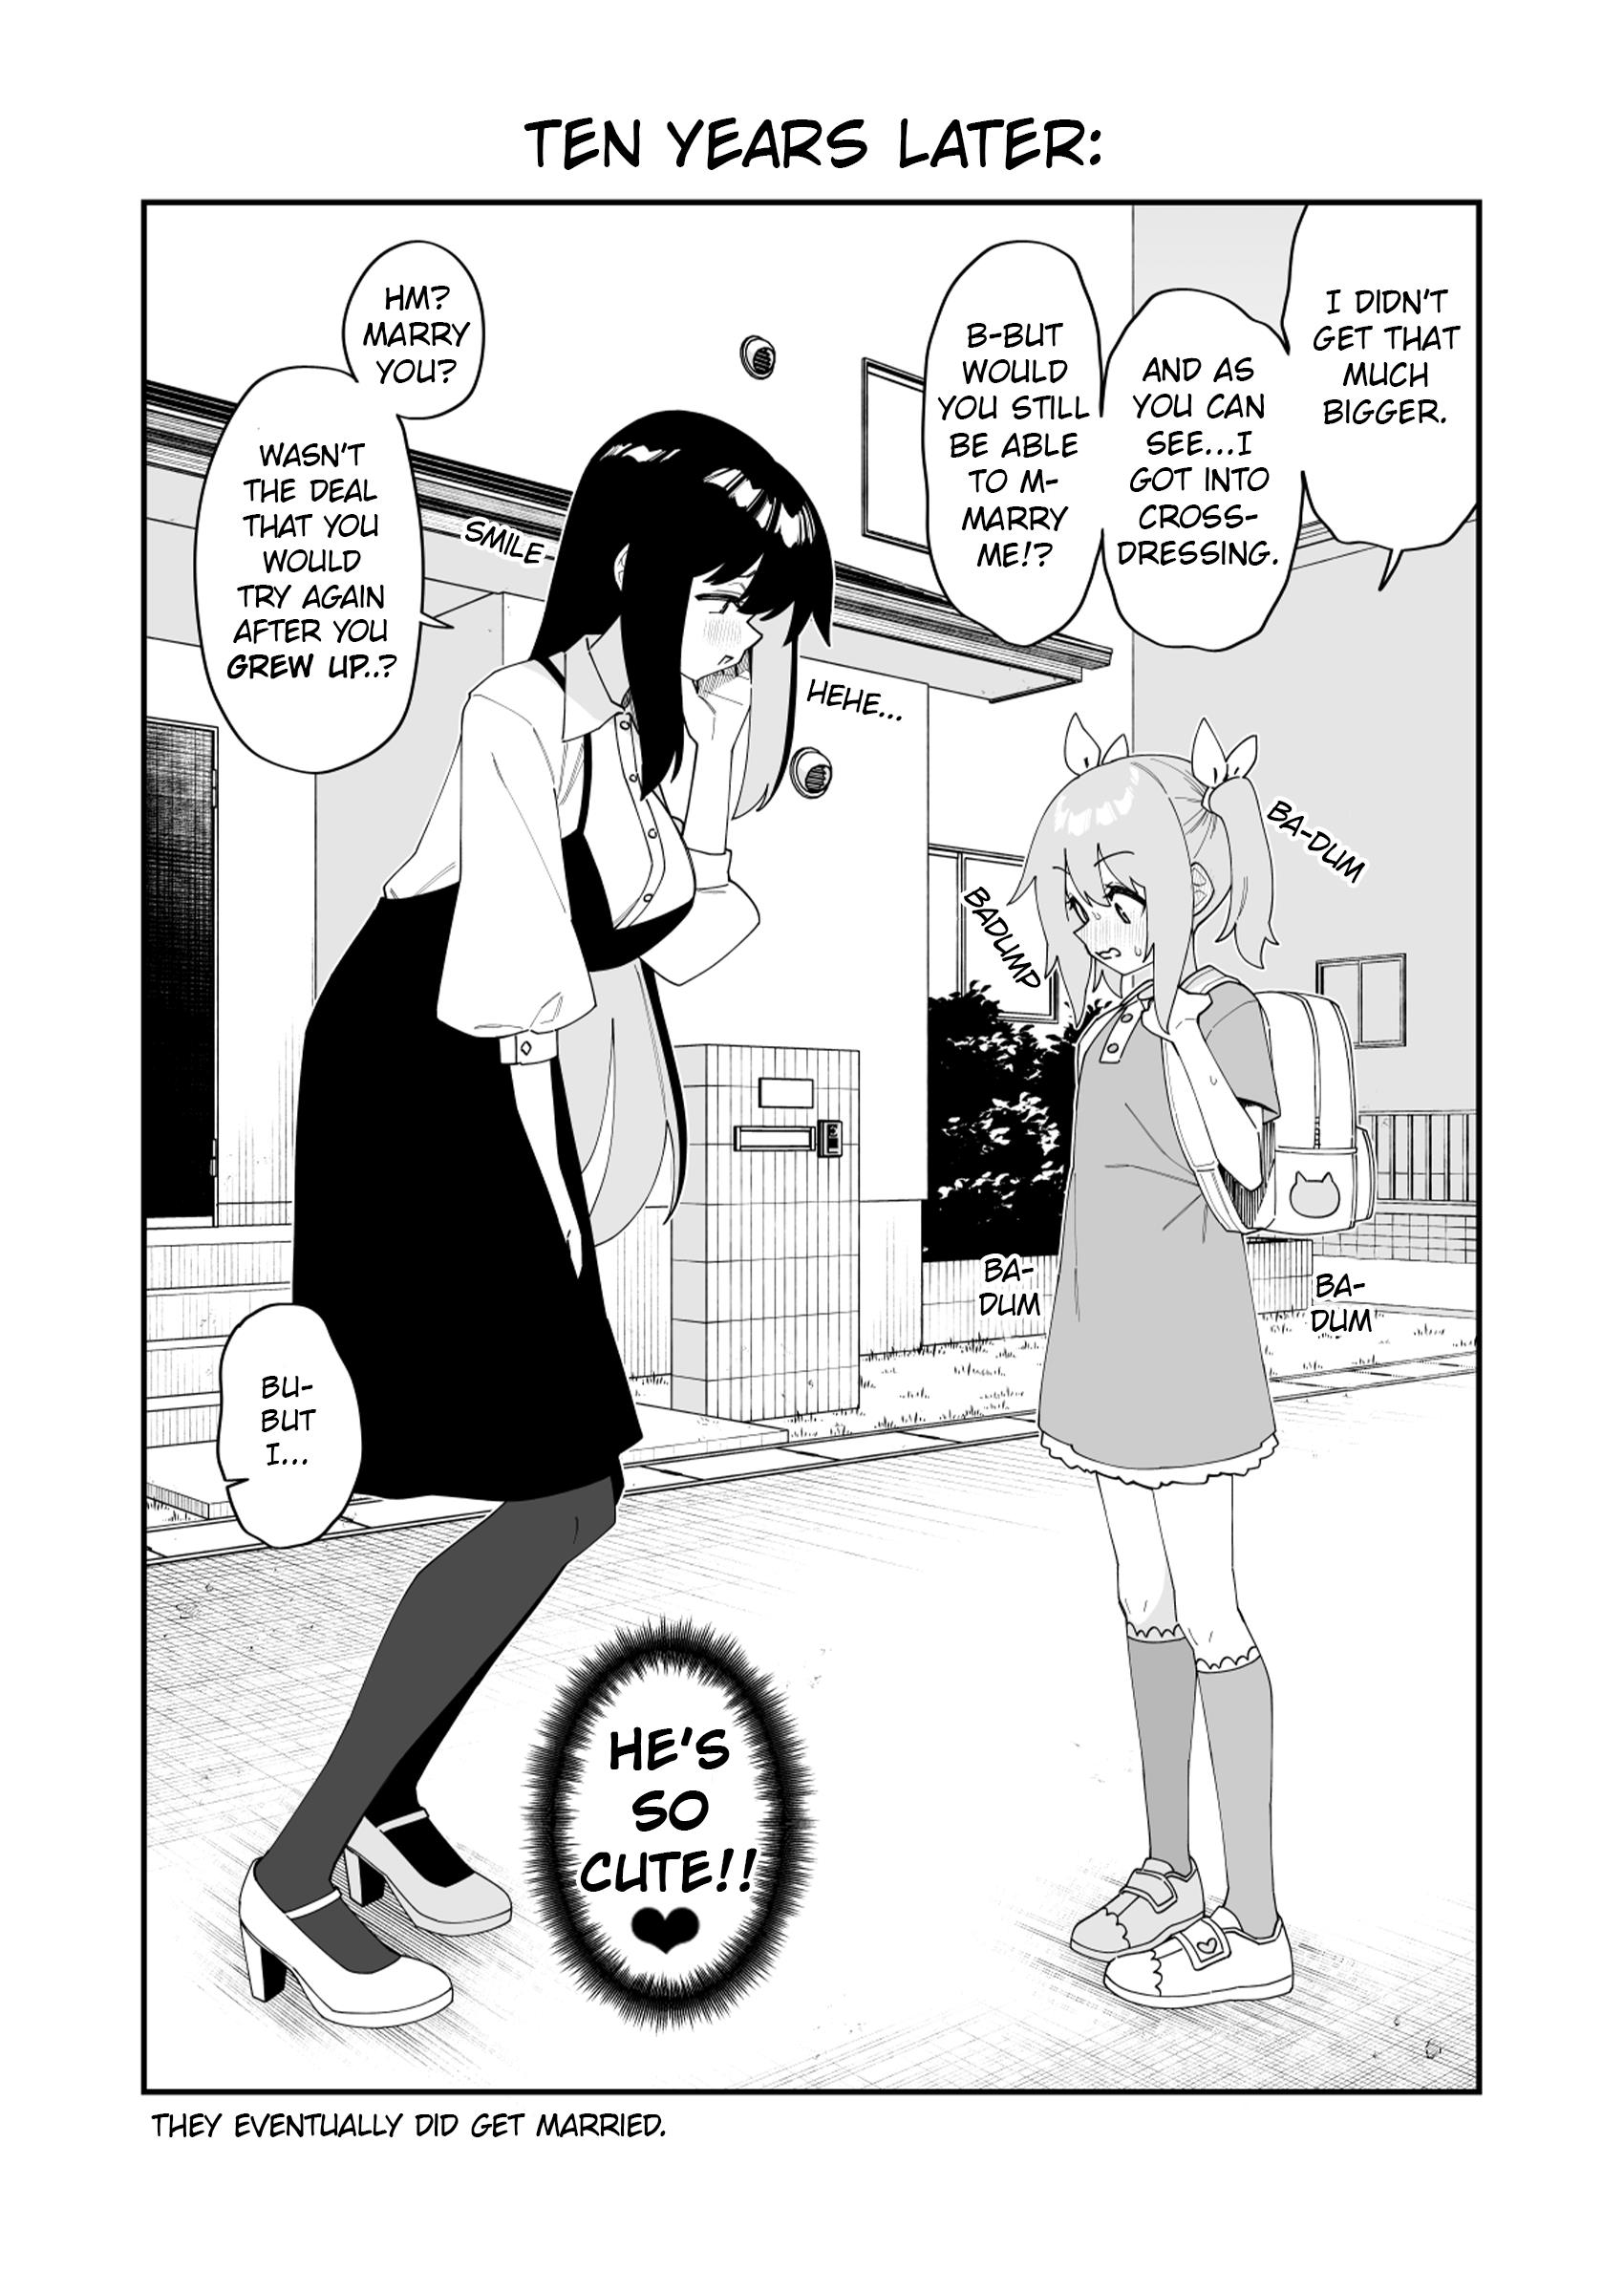 The Onee-San And The Shota: Before And After - Page 2